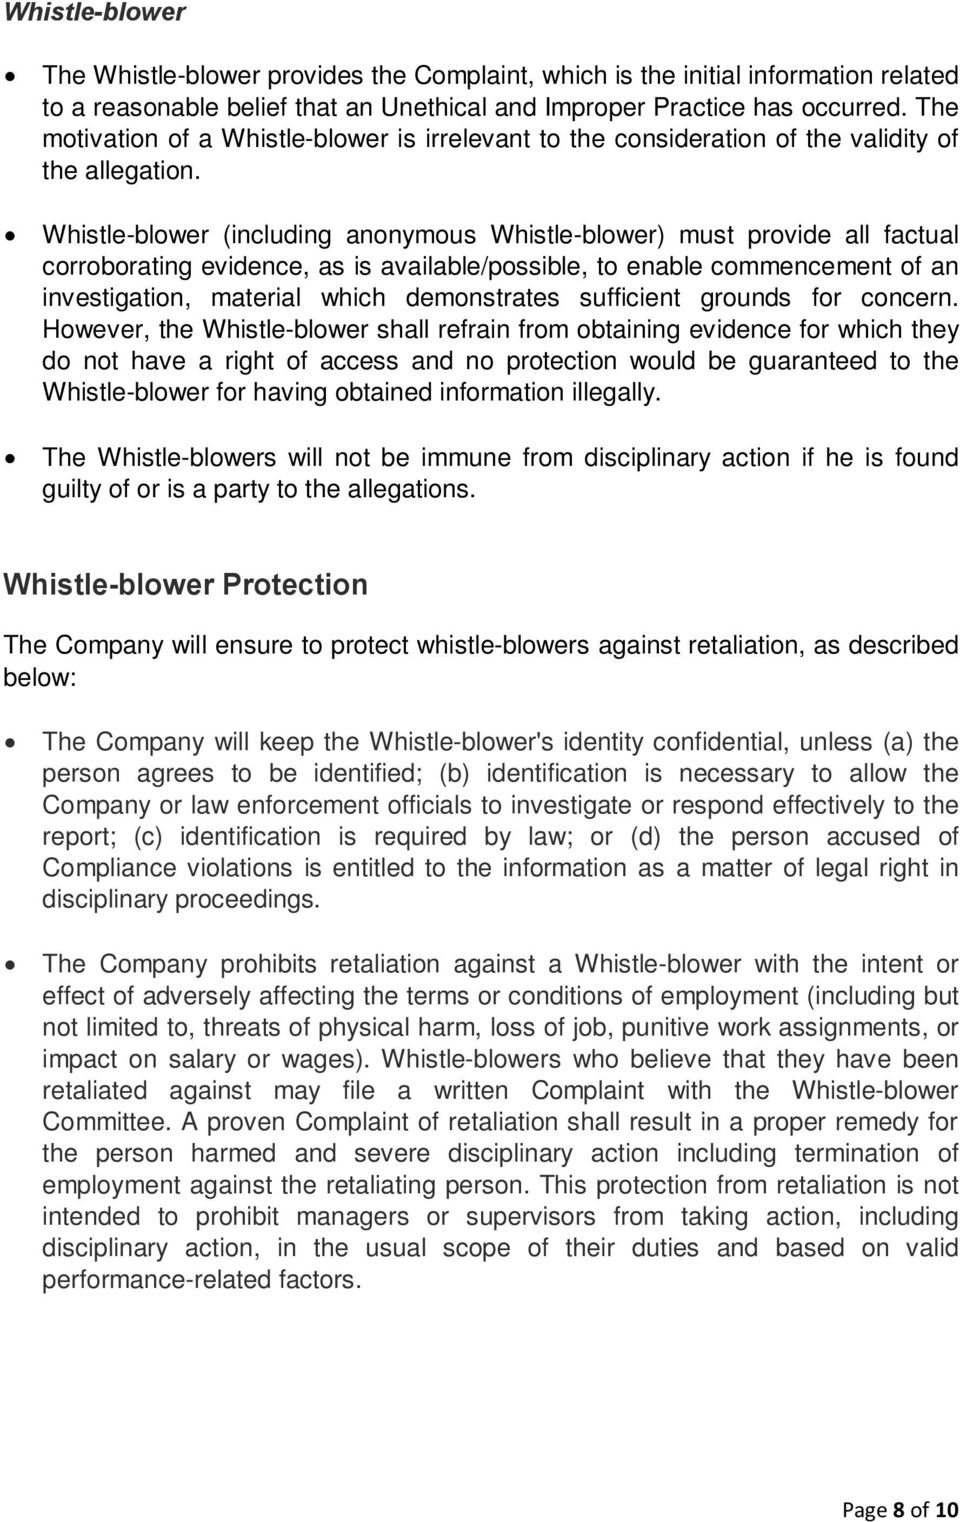 Whistle-blower (including anonymous Whistle-blower) must provide all factual corroborating evidence, as is available/possible, to enable commencement of an investigation, material which demonstrates